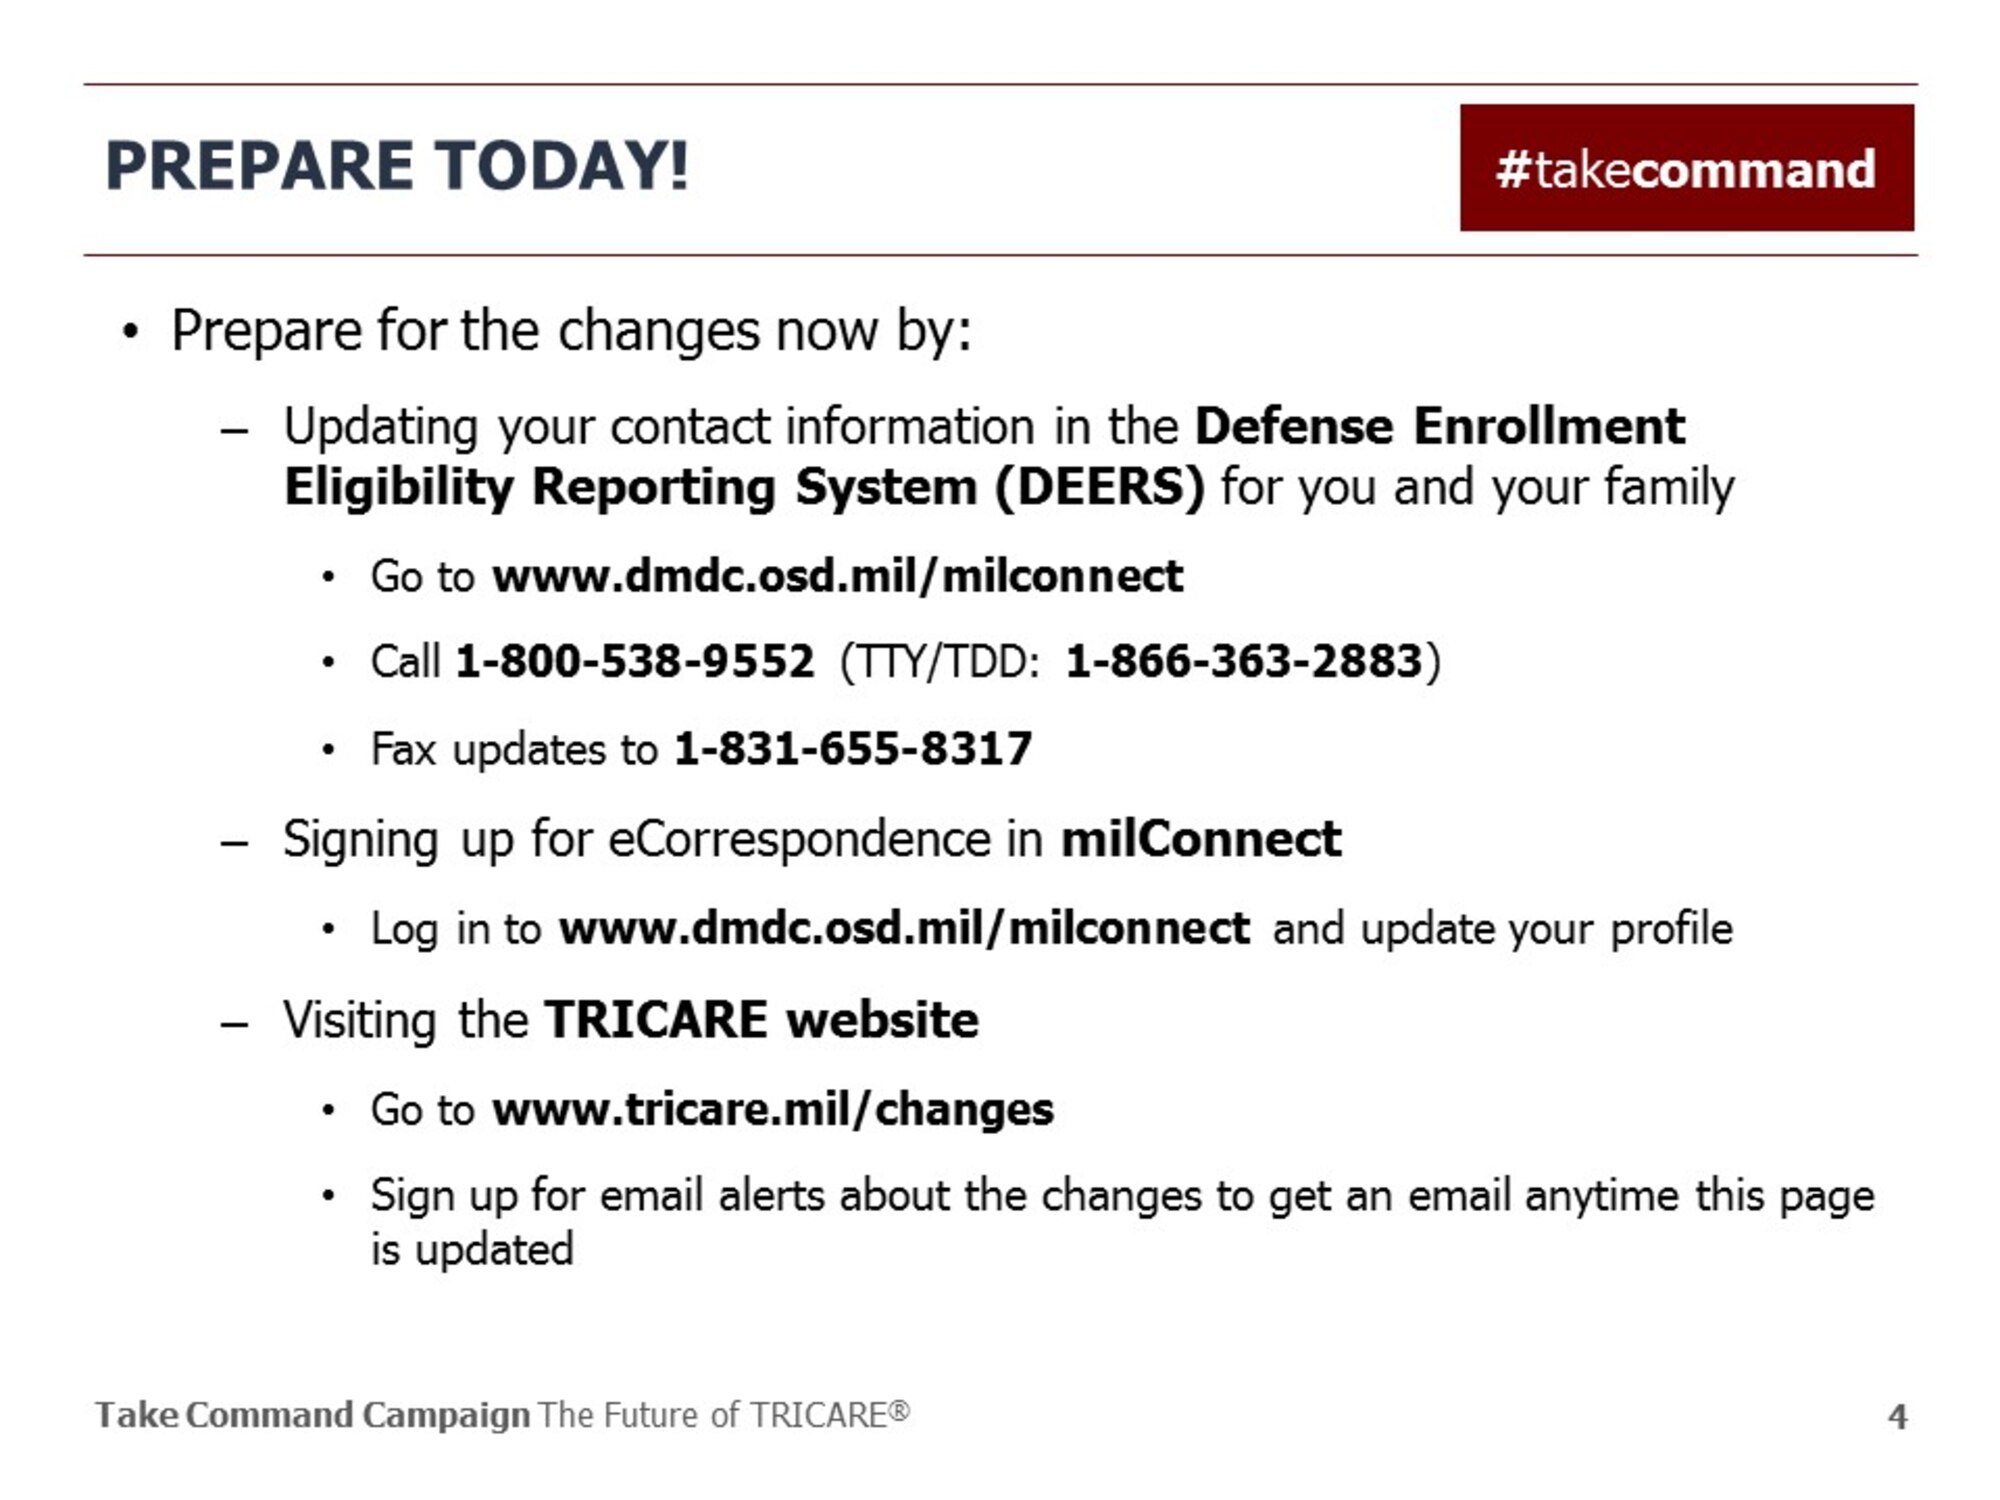 Ensure your information is up to date in DEERS and visit the TRICARE website for future changes. For more information on the changes visit the TOPA office in the medical clinic or call (307) 773-3011.